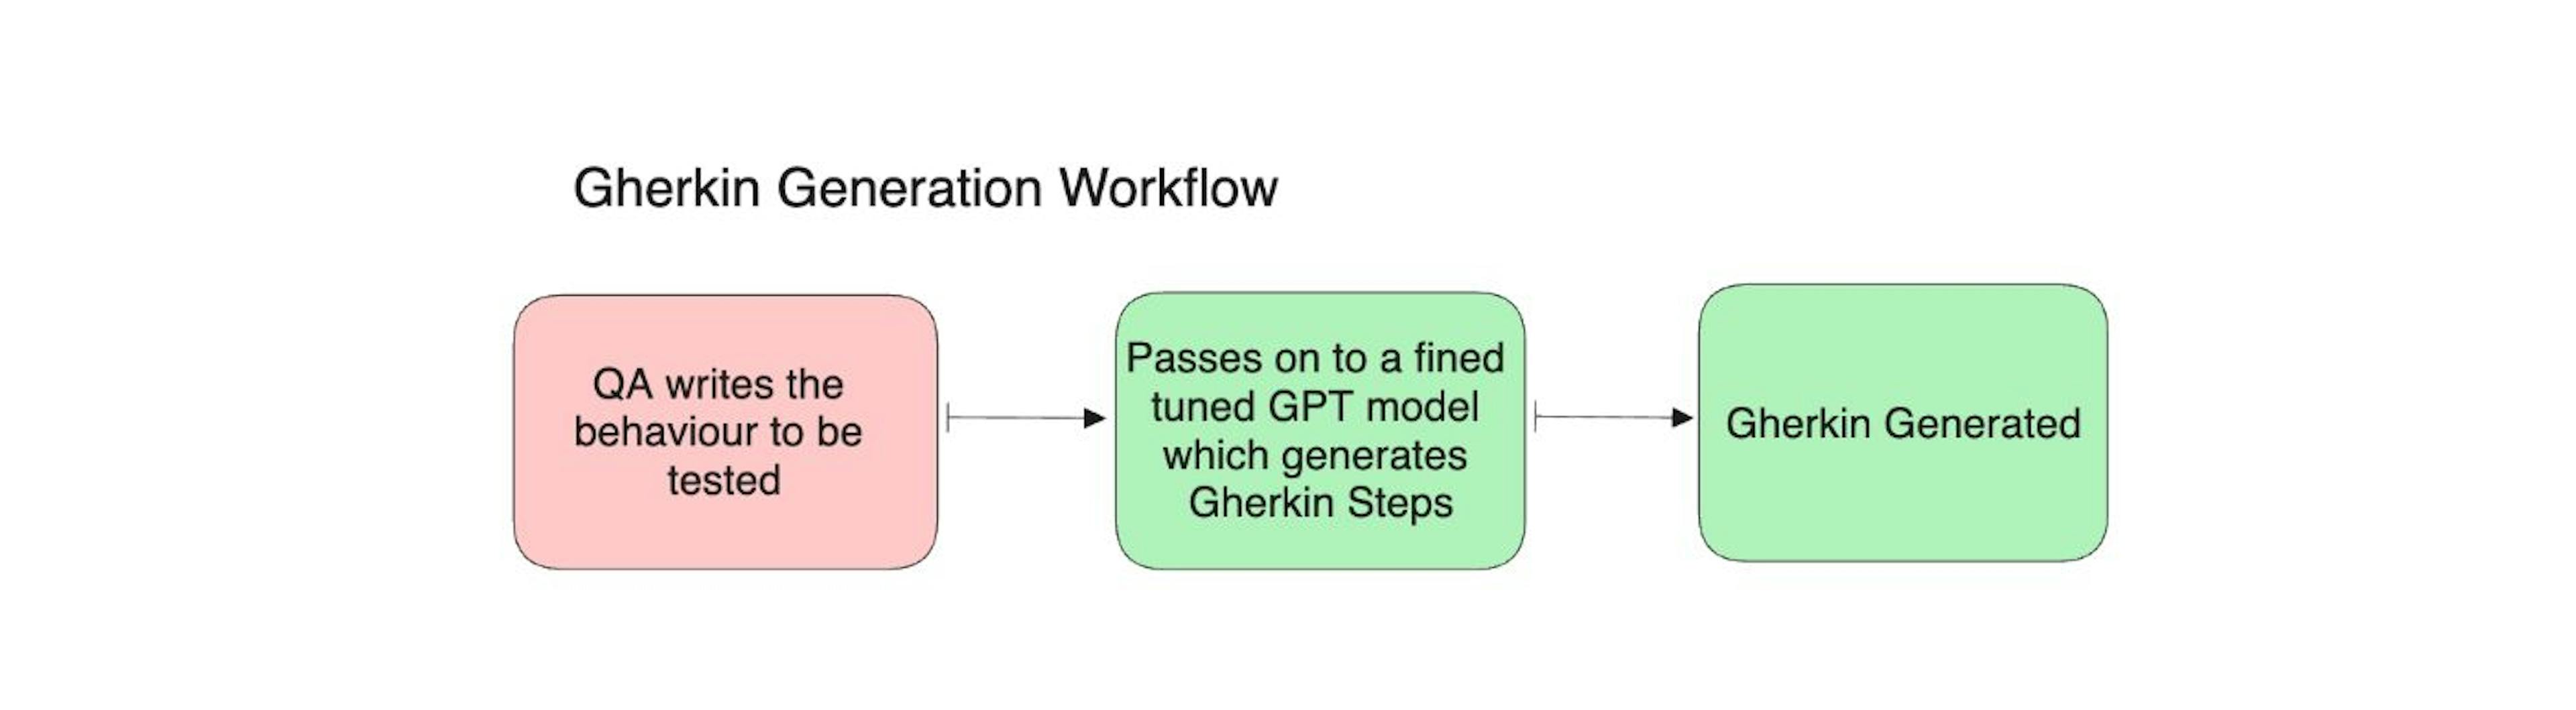 Workflow for generating Gherkin syntax